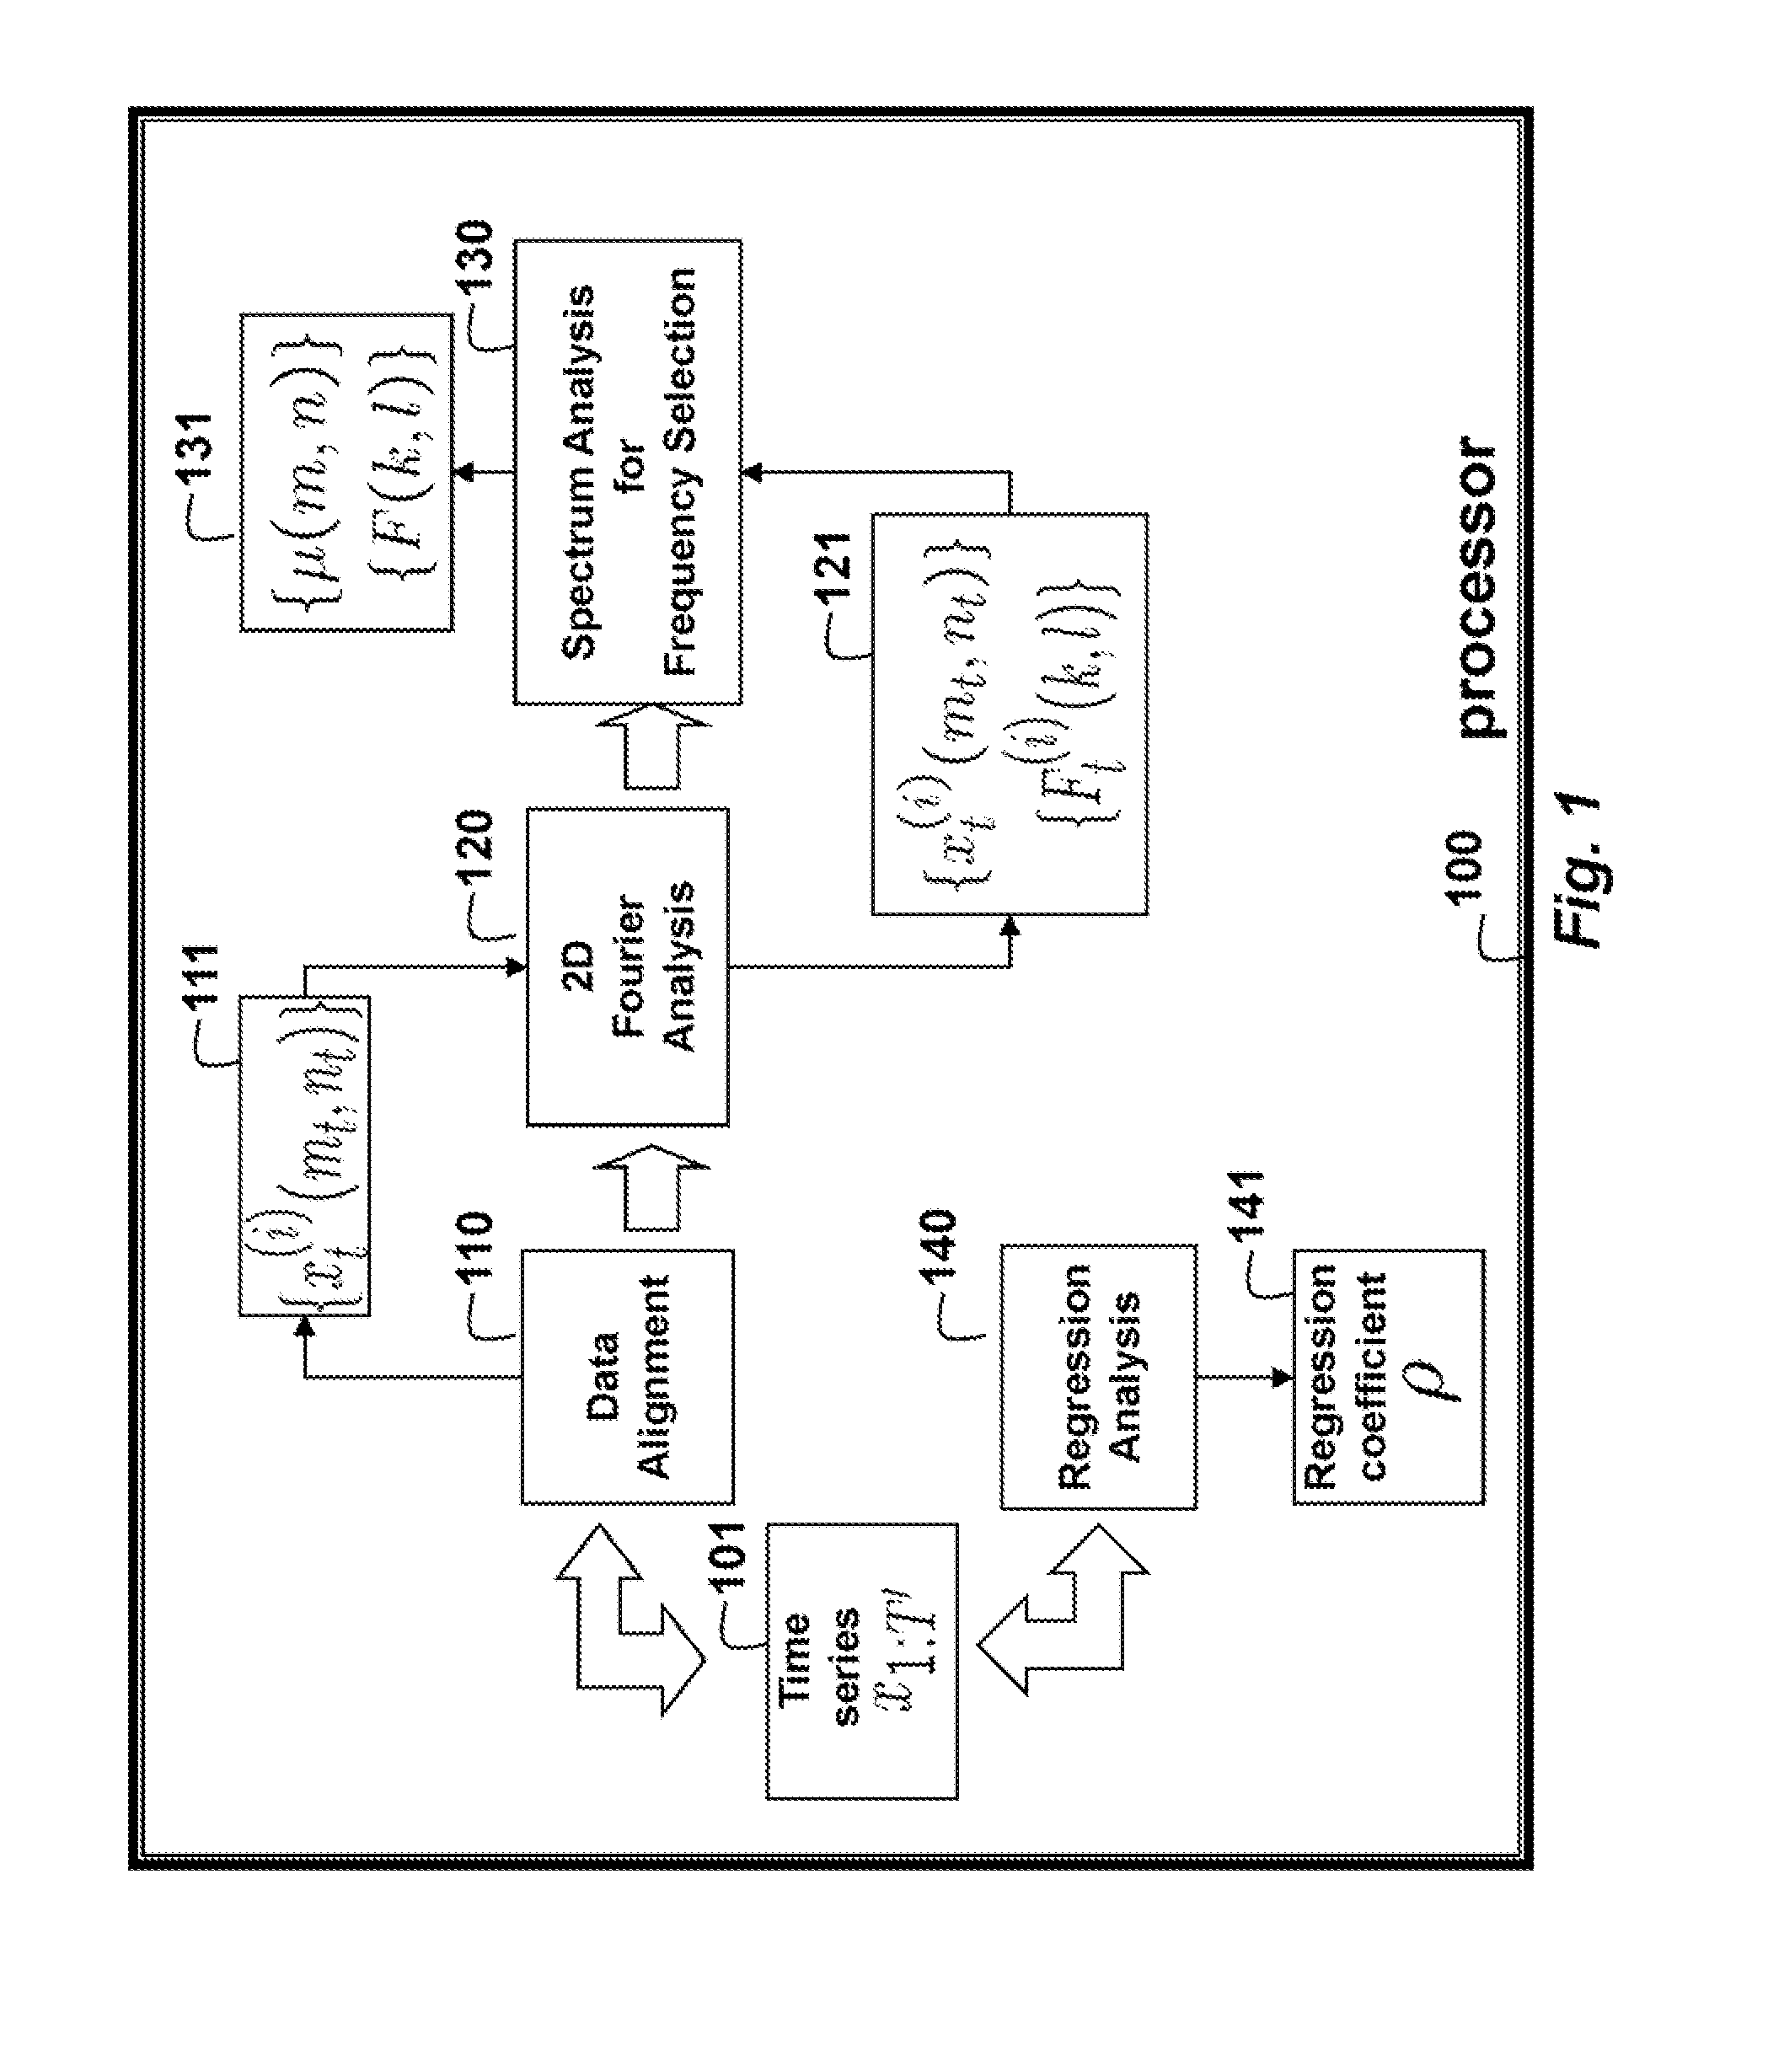 Method for Predicting Outputs of Photovoltaic Devices Based on Two-Dimensional Fourier Analysis and Seasonal Auto-Regression